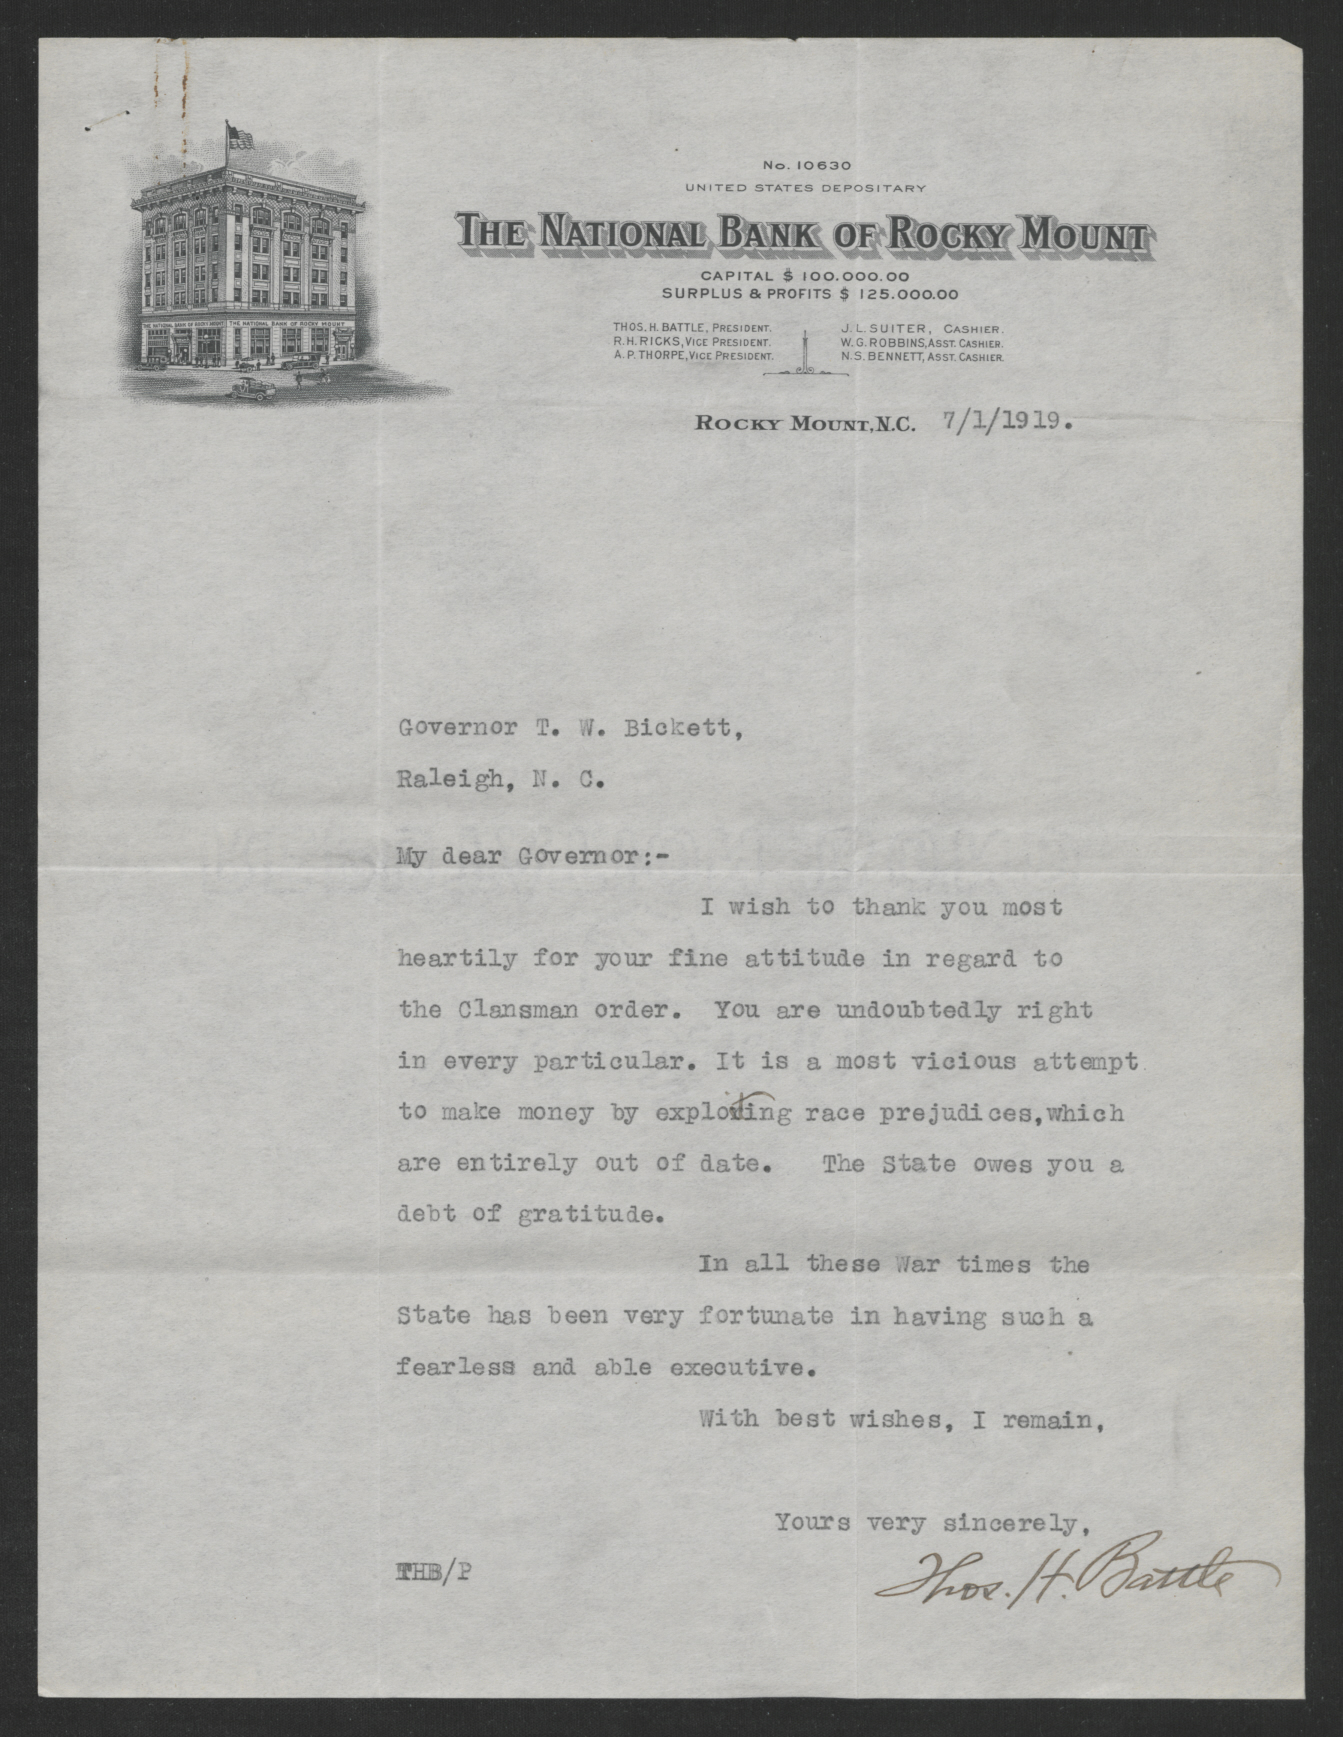 Letter from Thomas H. Battle to Thomas W. Bickett, July 1, 1919